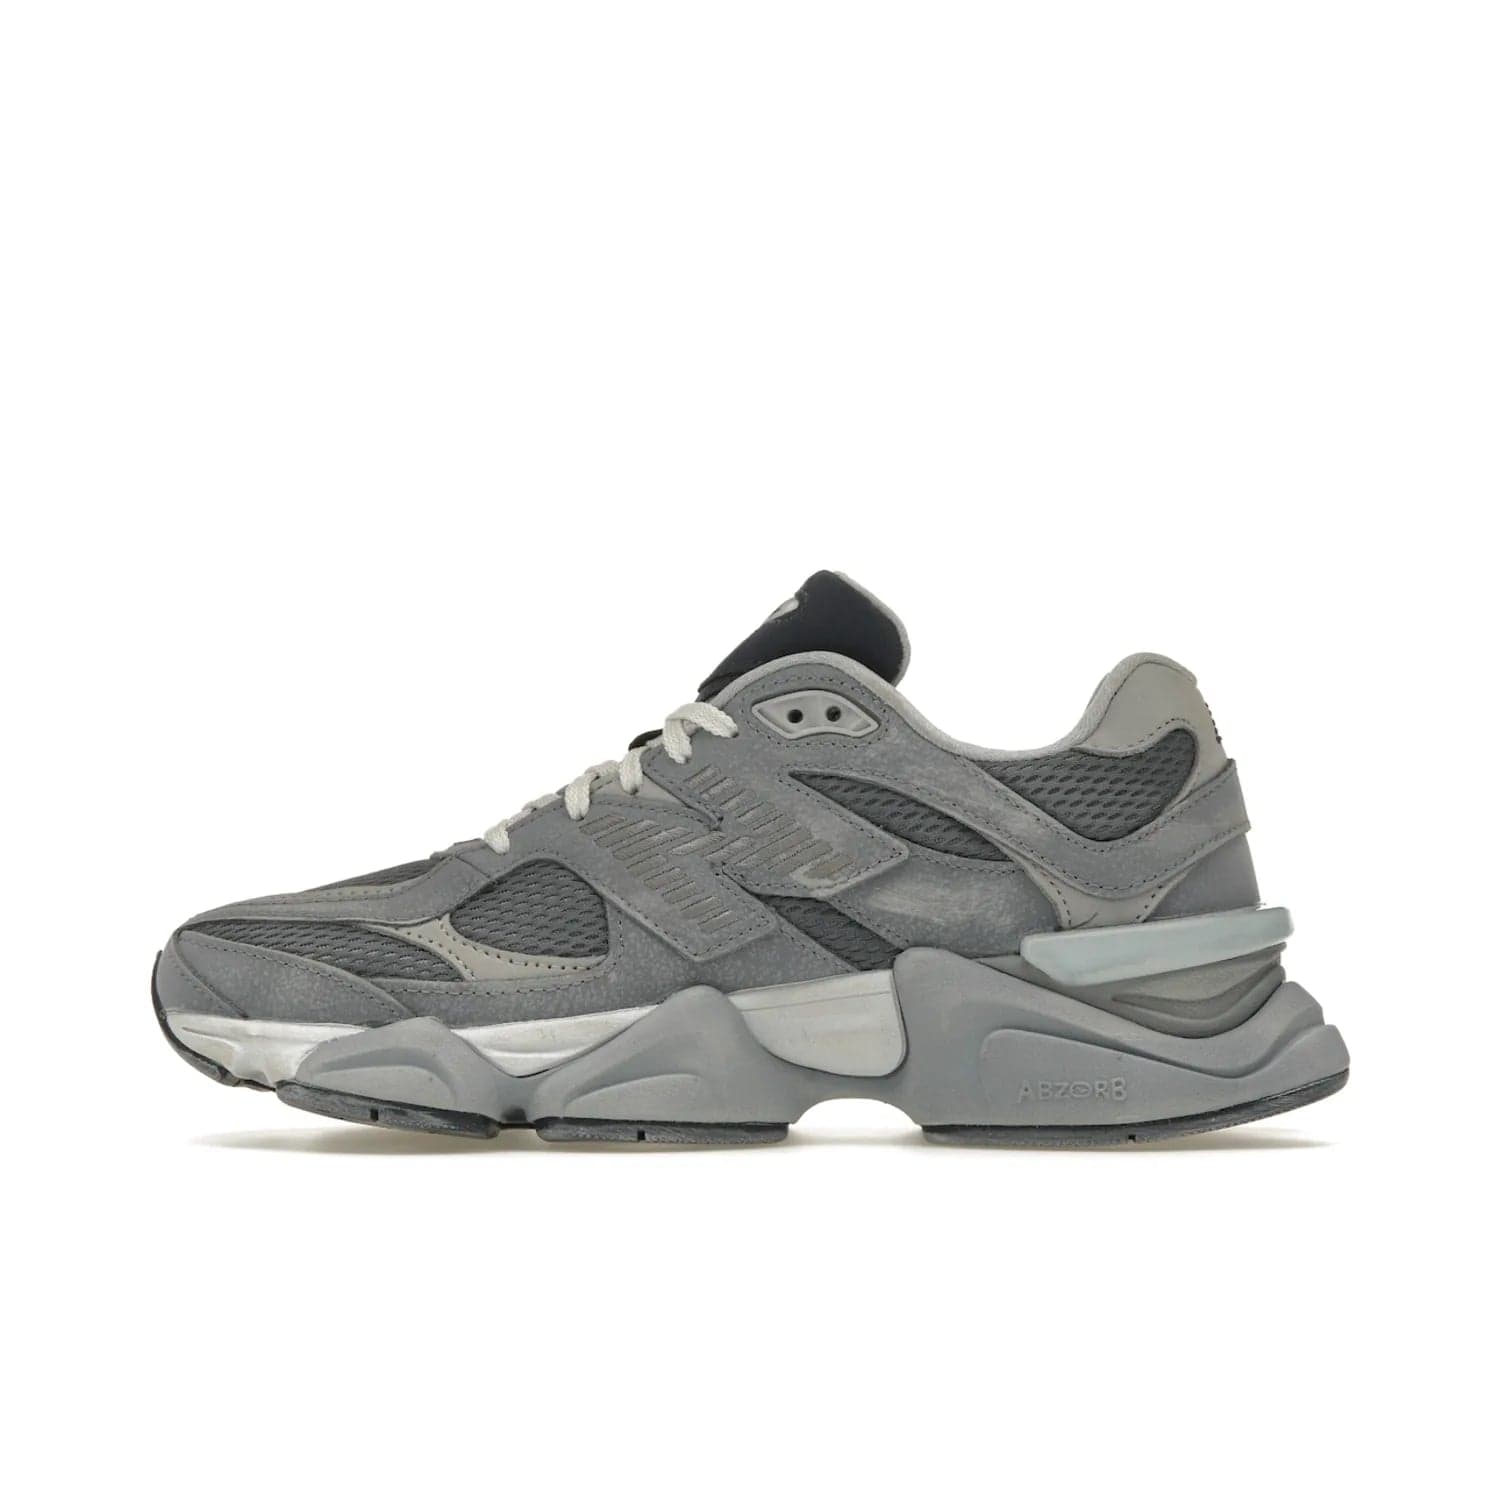 New Balance 9060 Grey Day (2023) - Image 19 - Only at www.BallersClubKickz.com - #
Sporty-meets-stylish in the New Balance 9060 Grey Day sneaker. Designed with Arctic Grey, Steel, and Silver Metallic, it offers an edgy but wearable look along with classic NB comfort and quality.